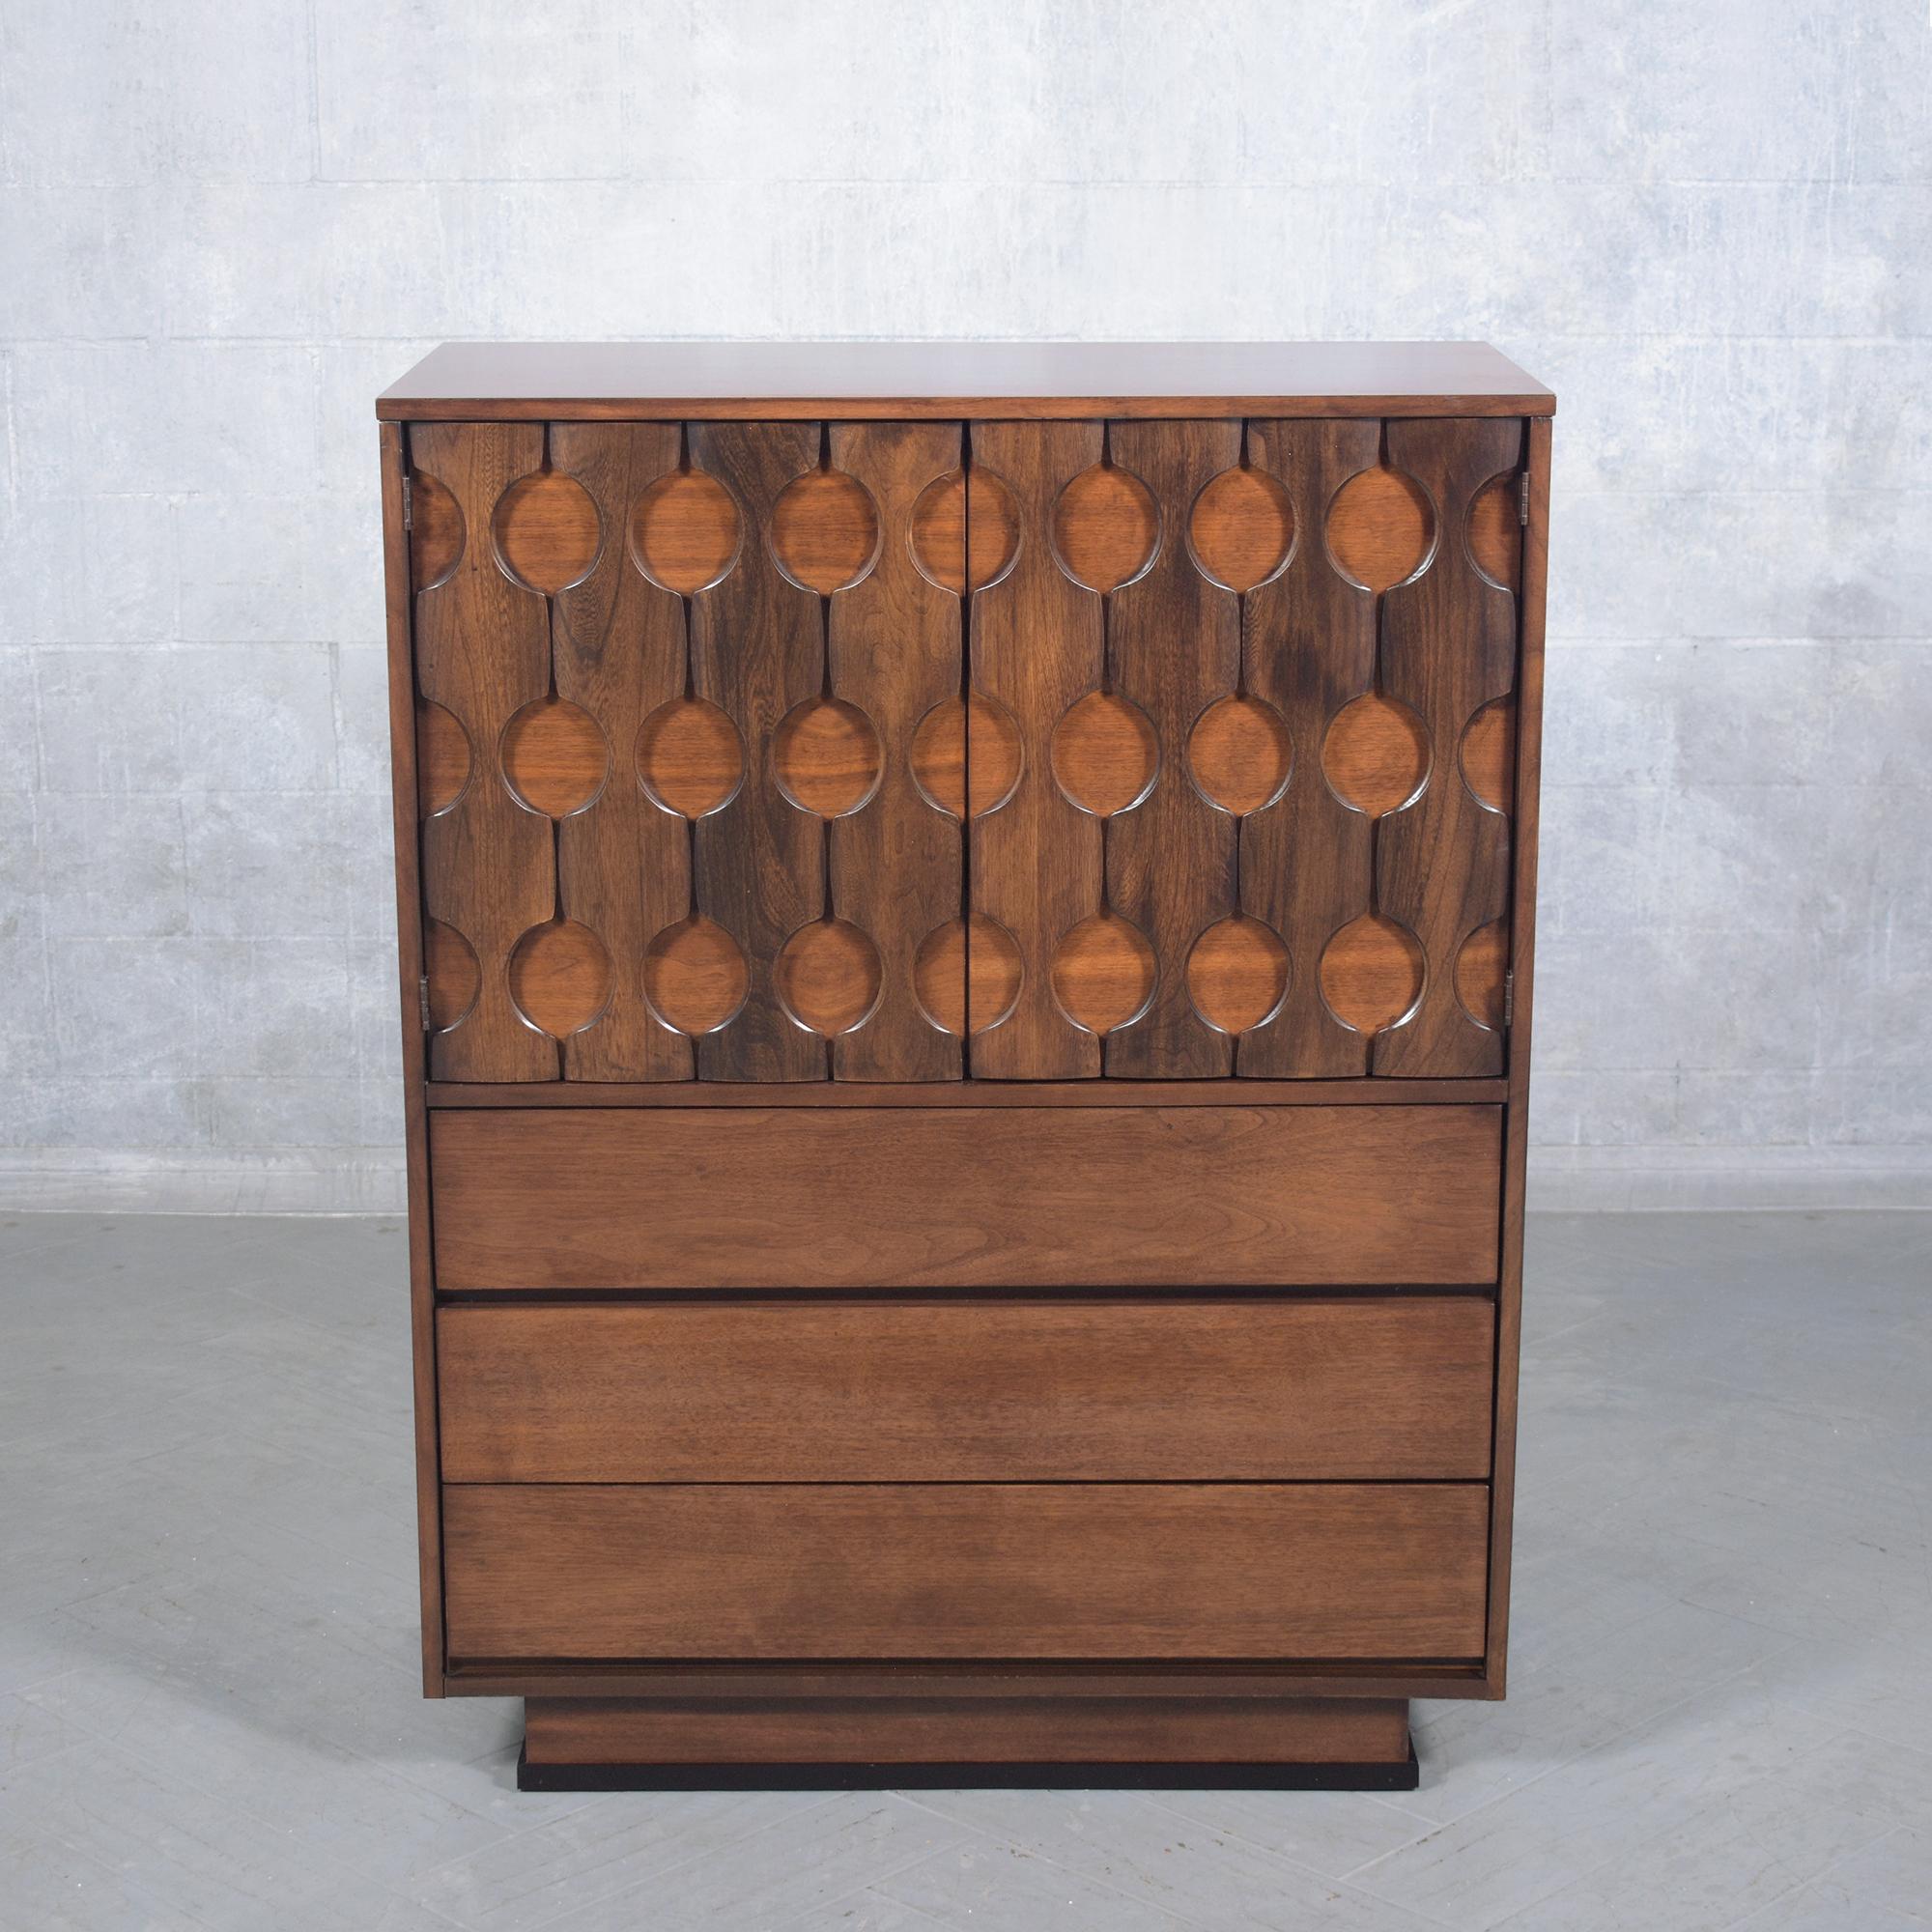 Explore the classic elegance of our beautifully restored mid-century chest of drawers, meticulously crafted from premium walnut. This vintage 1960s dresser, in pristine condition, showcases a deep walnut stain protected by a satin lacquer finish